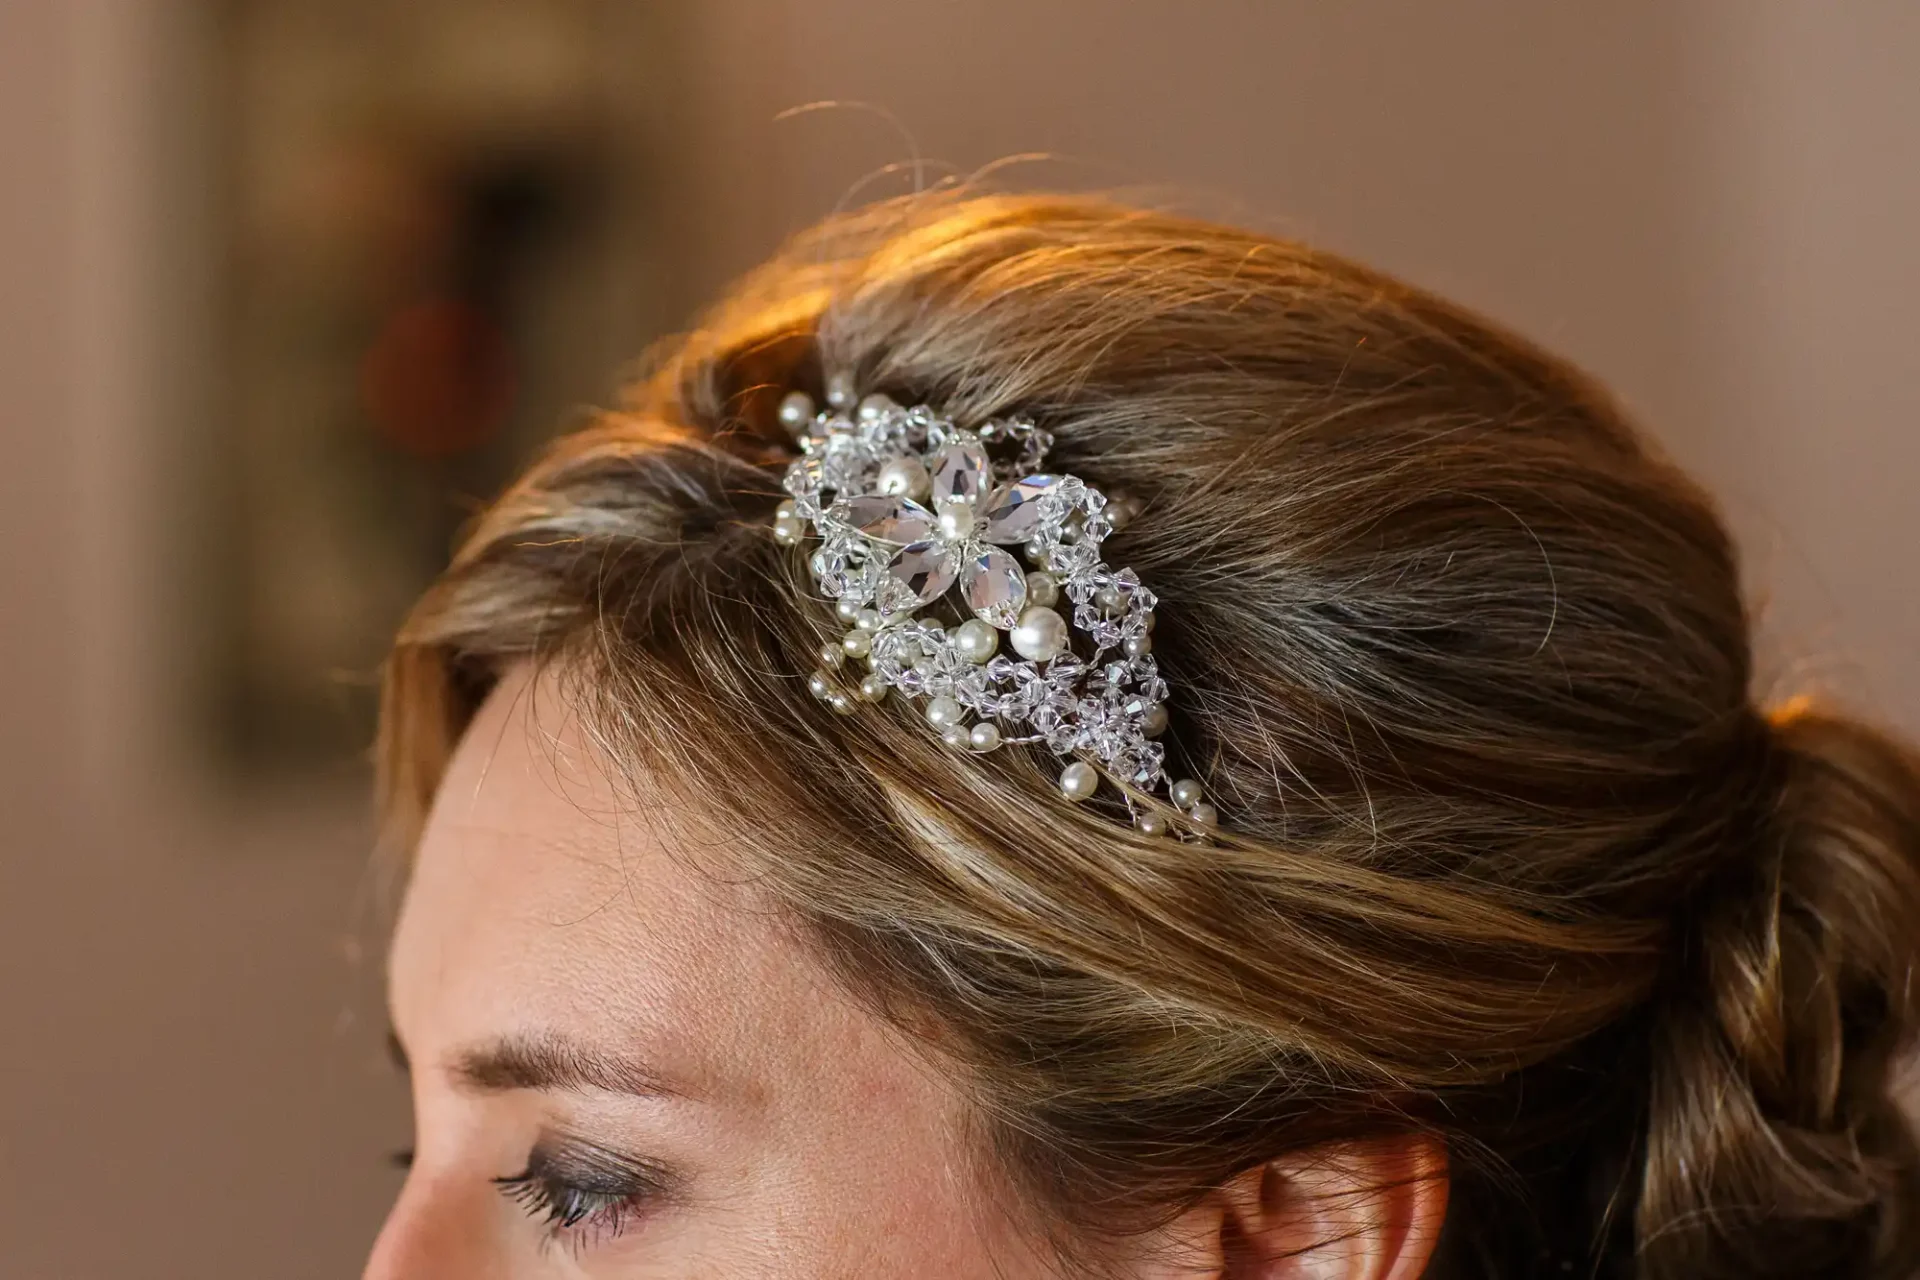 Close-up of a woman's hairstyle adorned with an intricate, jewel-encrusted hair accessory.